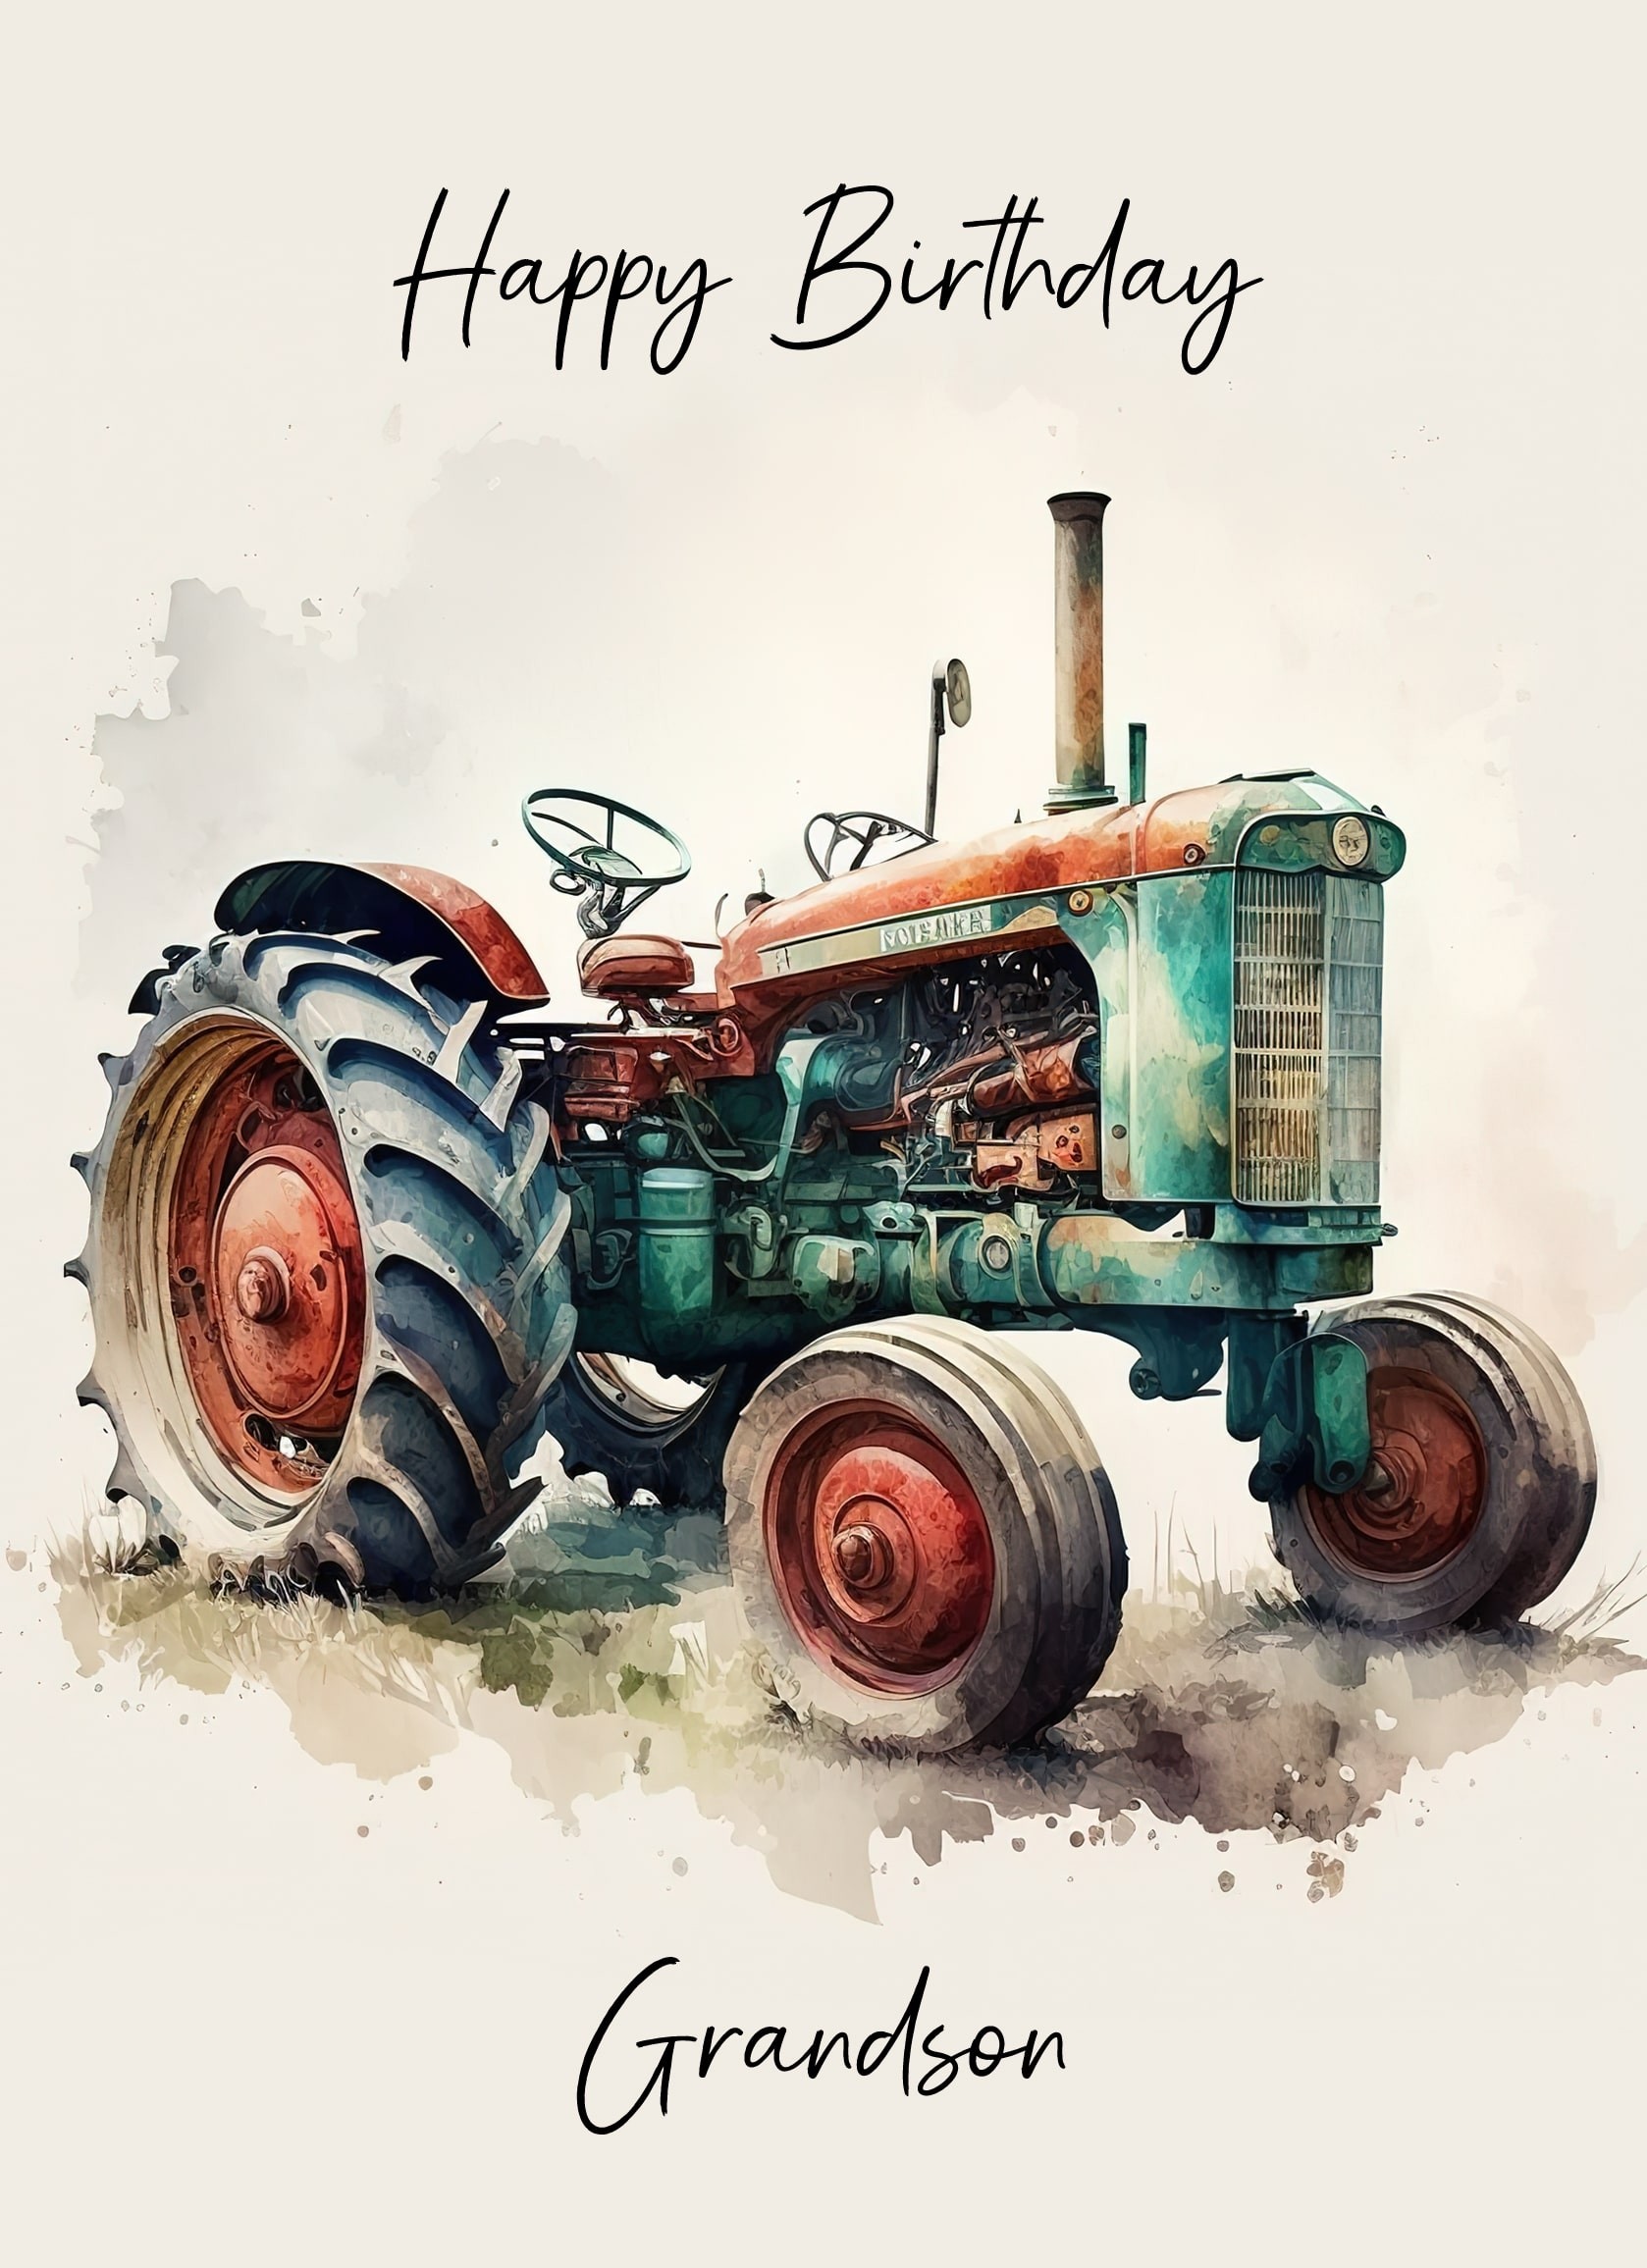 Tractor Birthday Card for Grandson